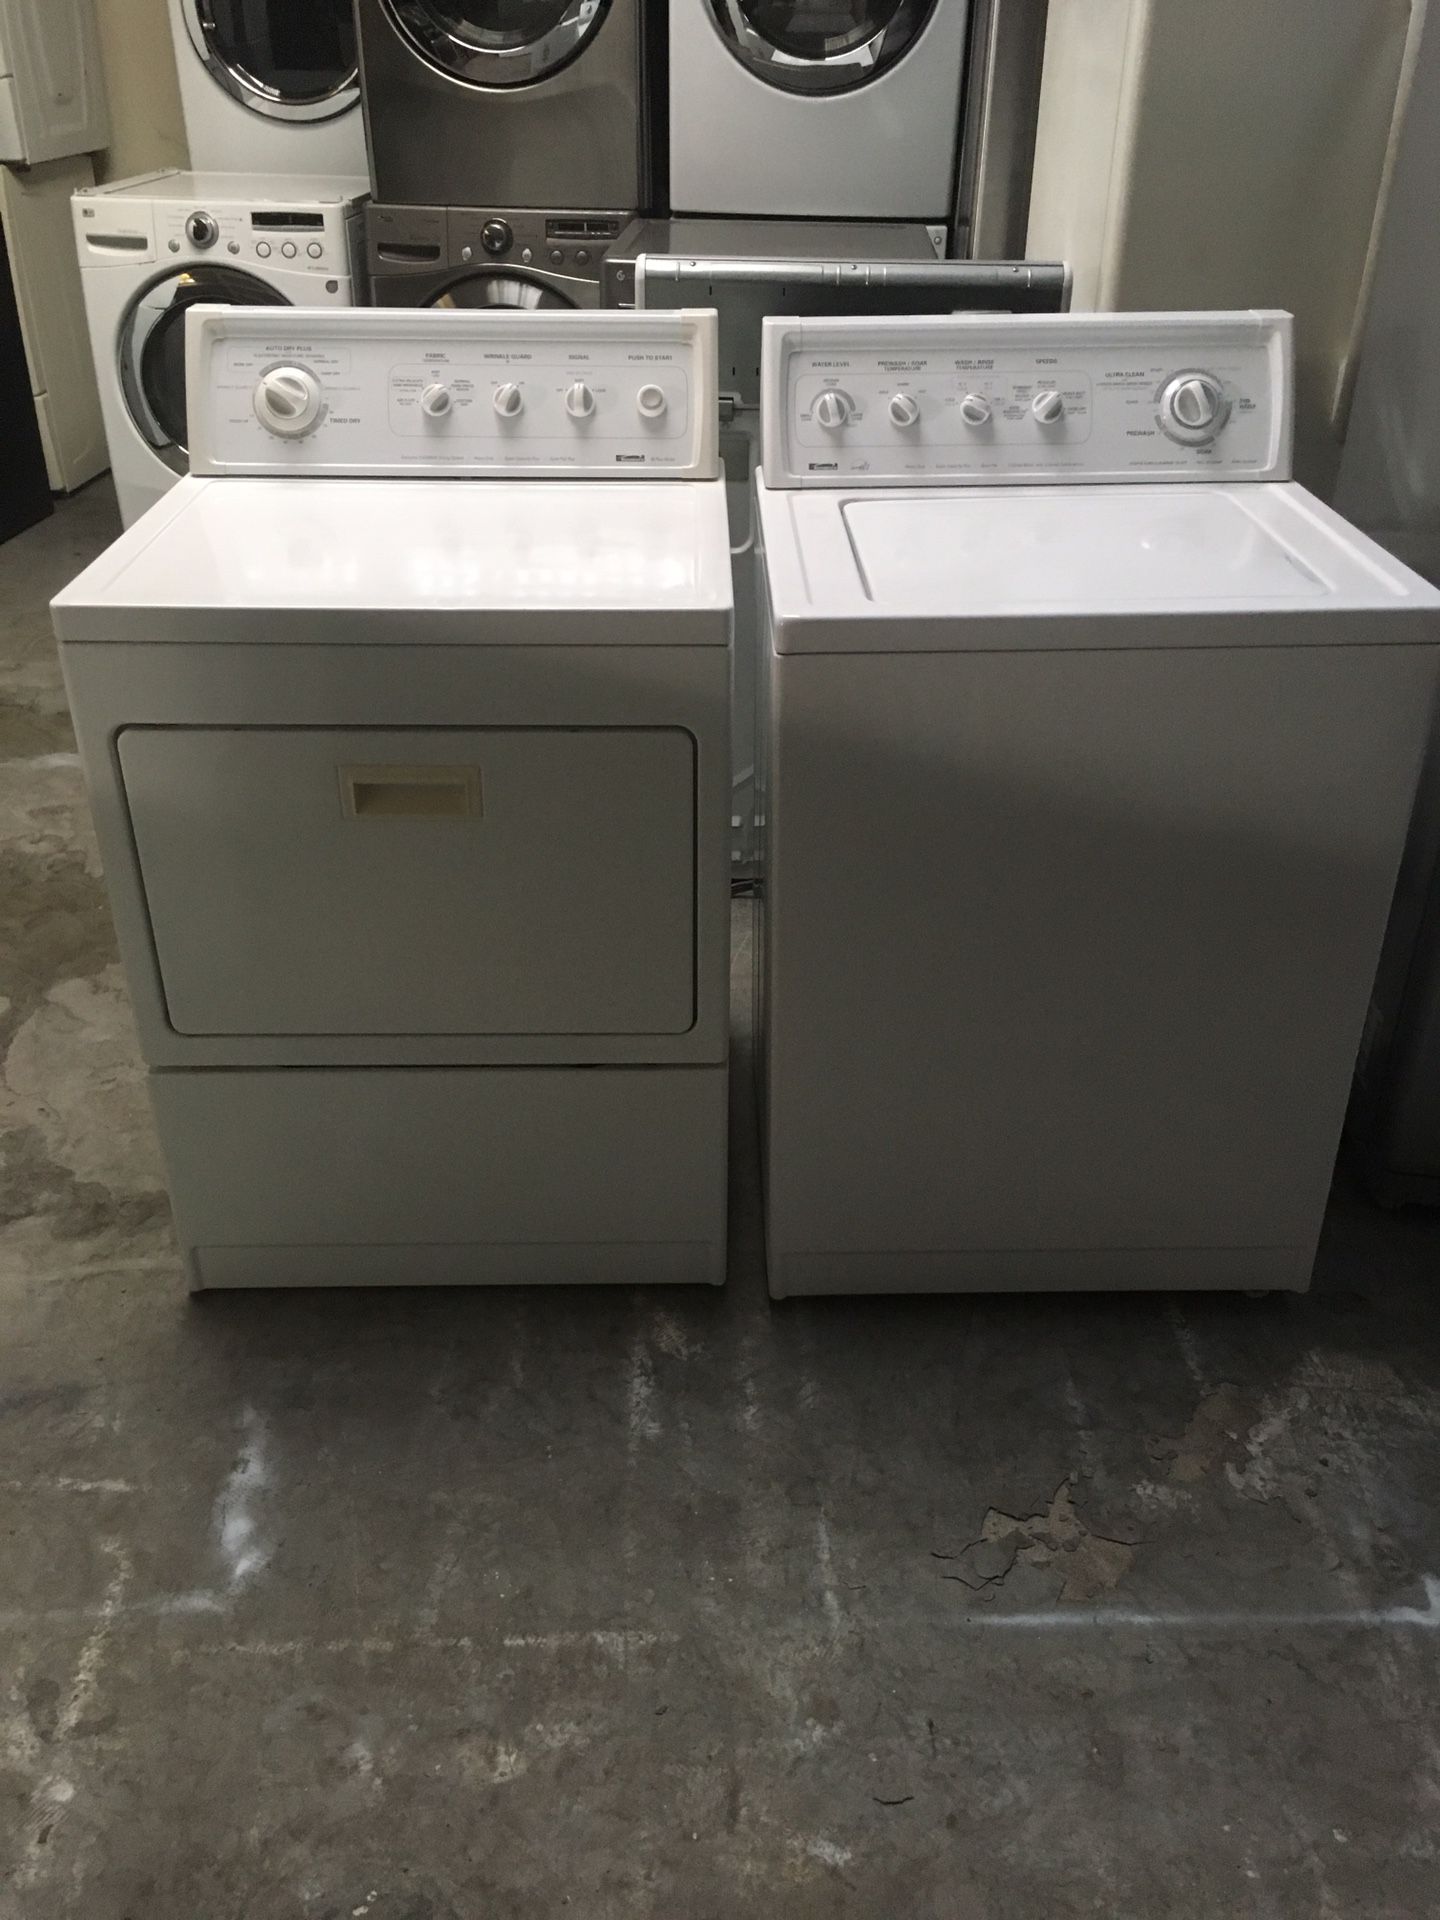 Set washer and dryer brand kenmore gas dryer everything is good working condition 90 days warranty delivery and installation